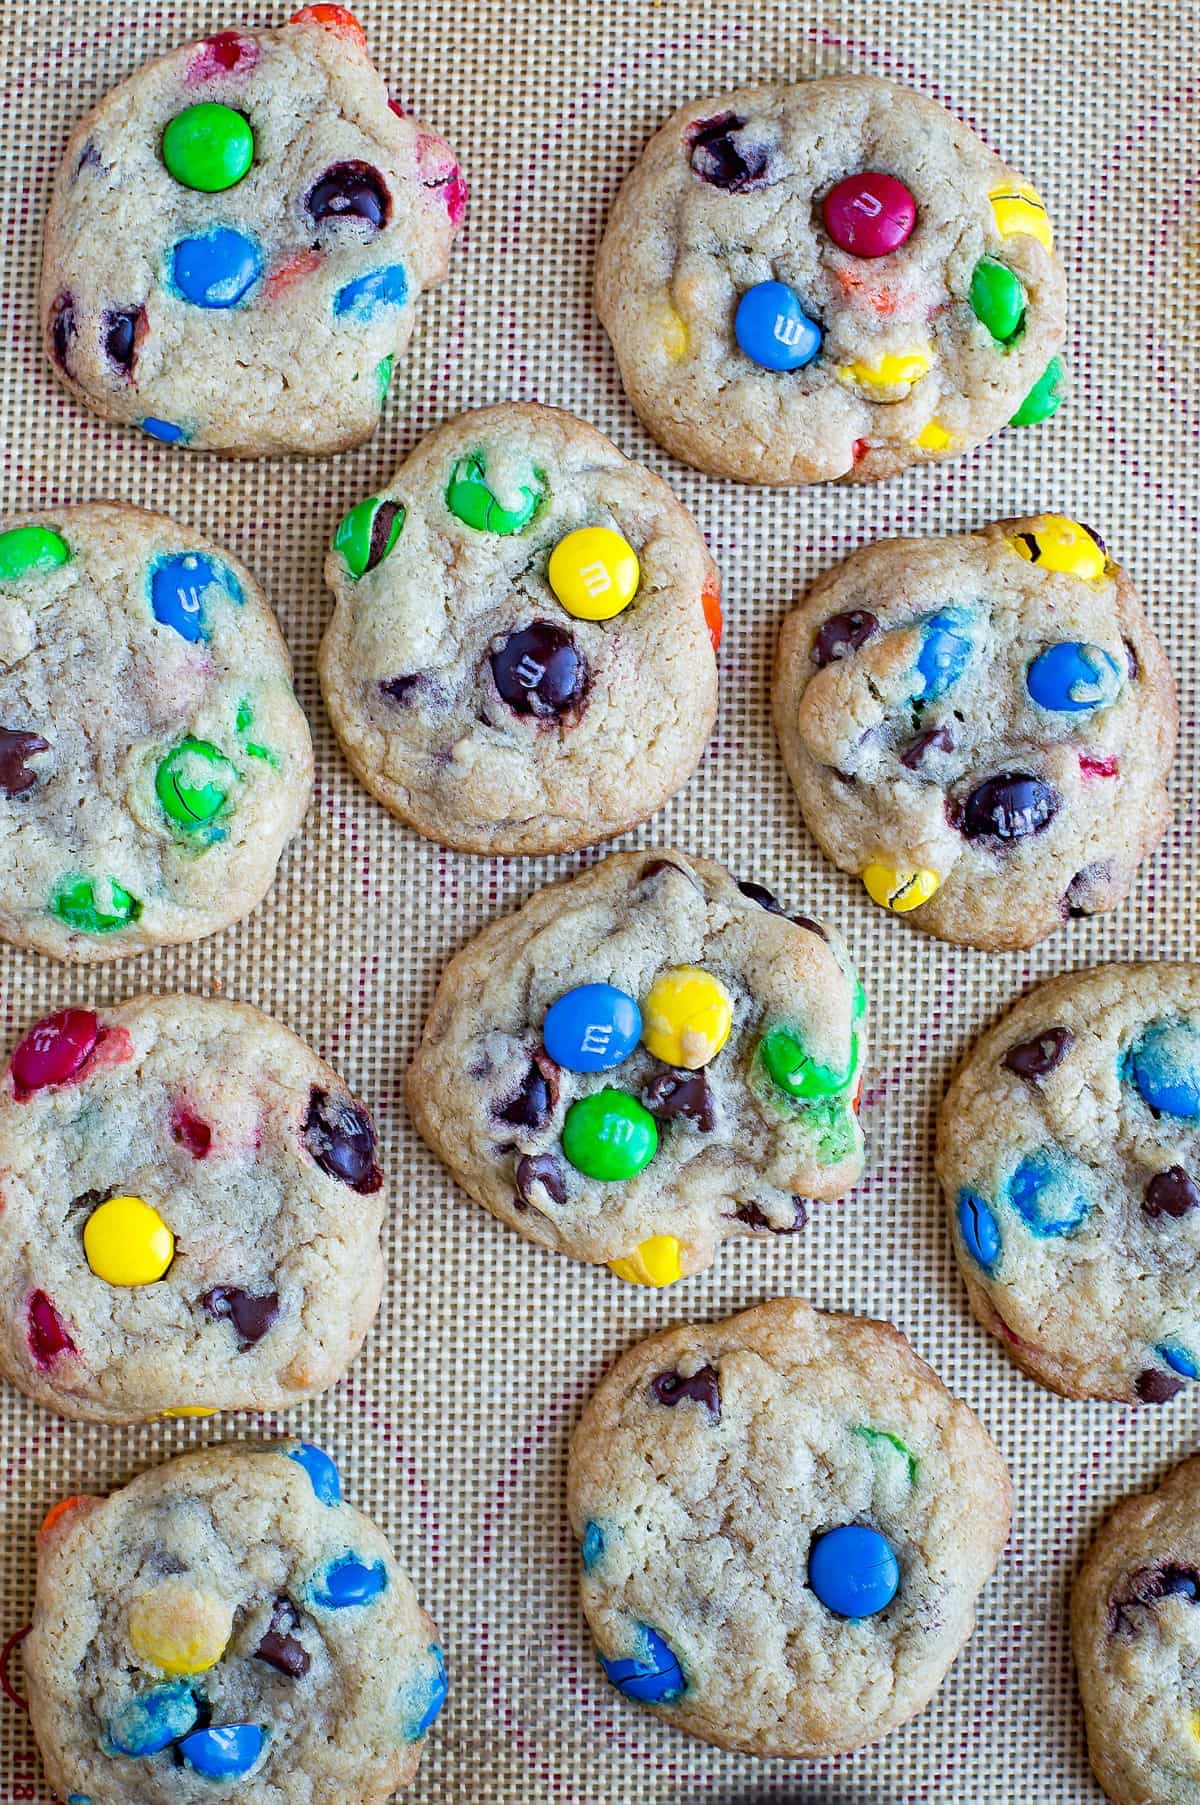 Bakery Style M&M Chocolate Chip Cookies